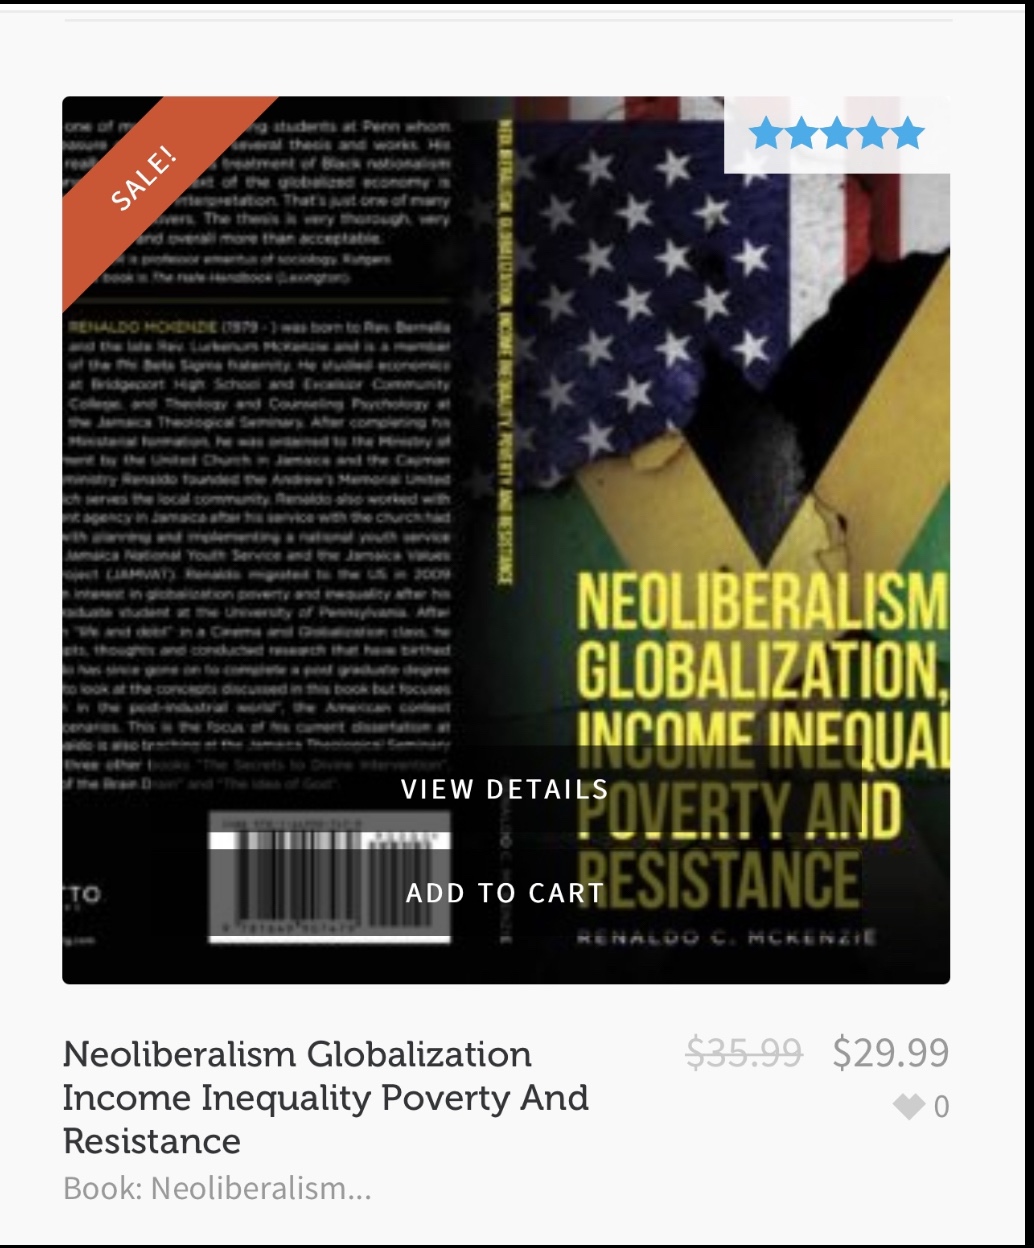 Get The Book, Neoliberalism, and More at The NeoLiberal Online Store